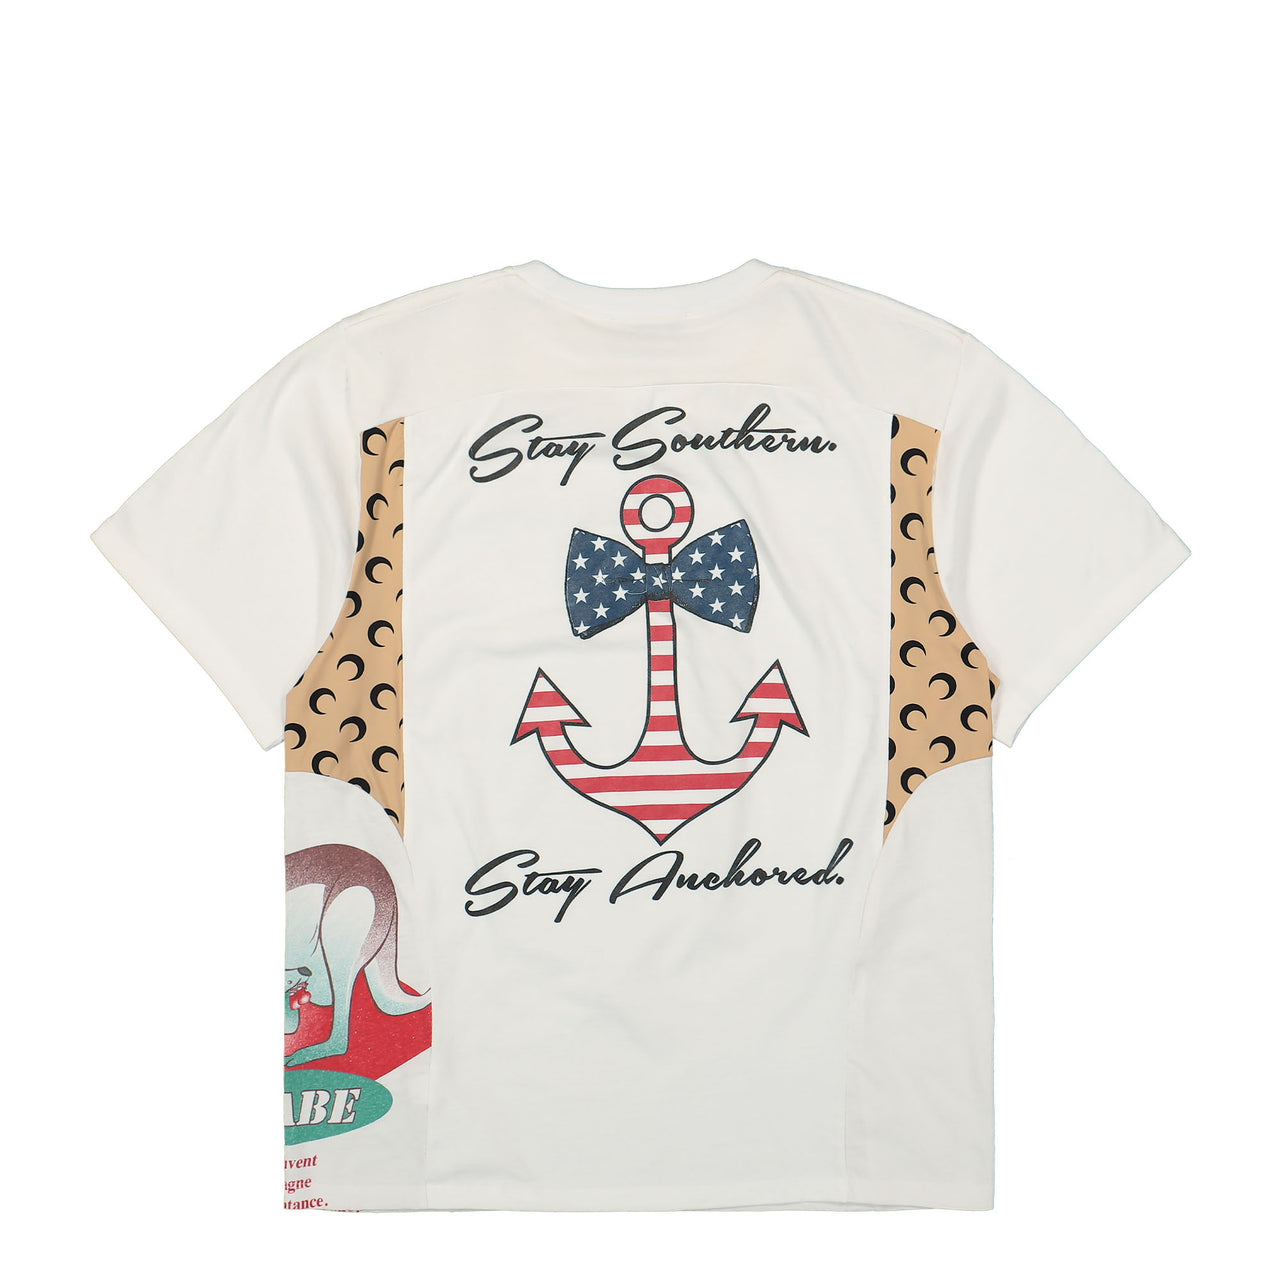 Stay Southern Stay Anchored Graphic T-Shirt